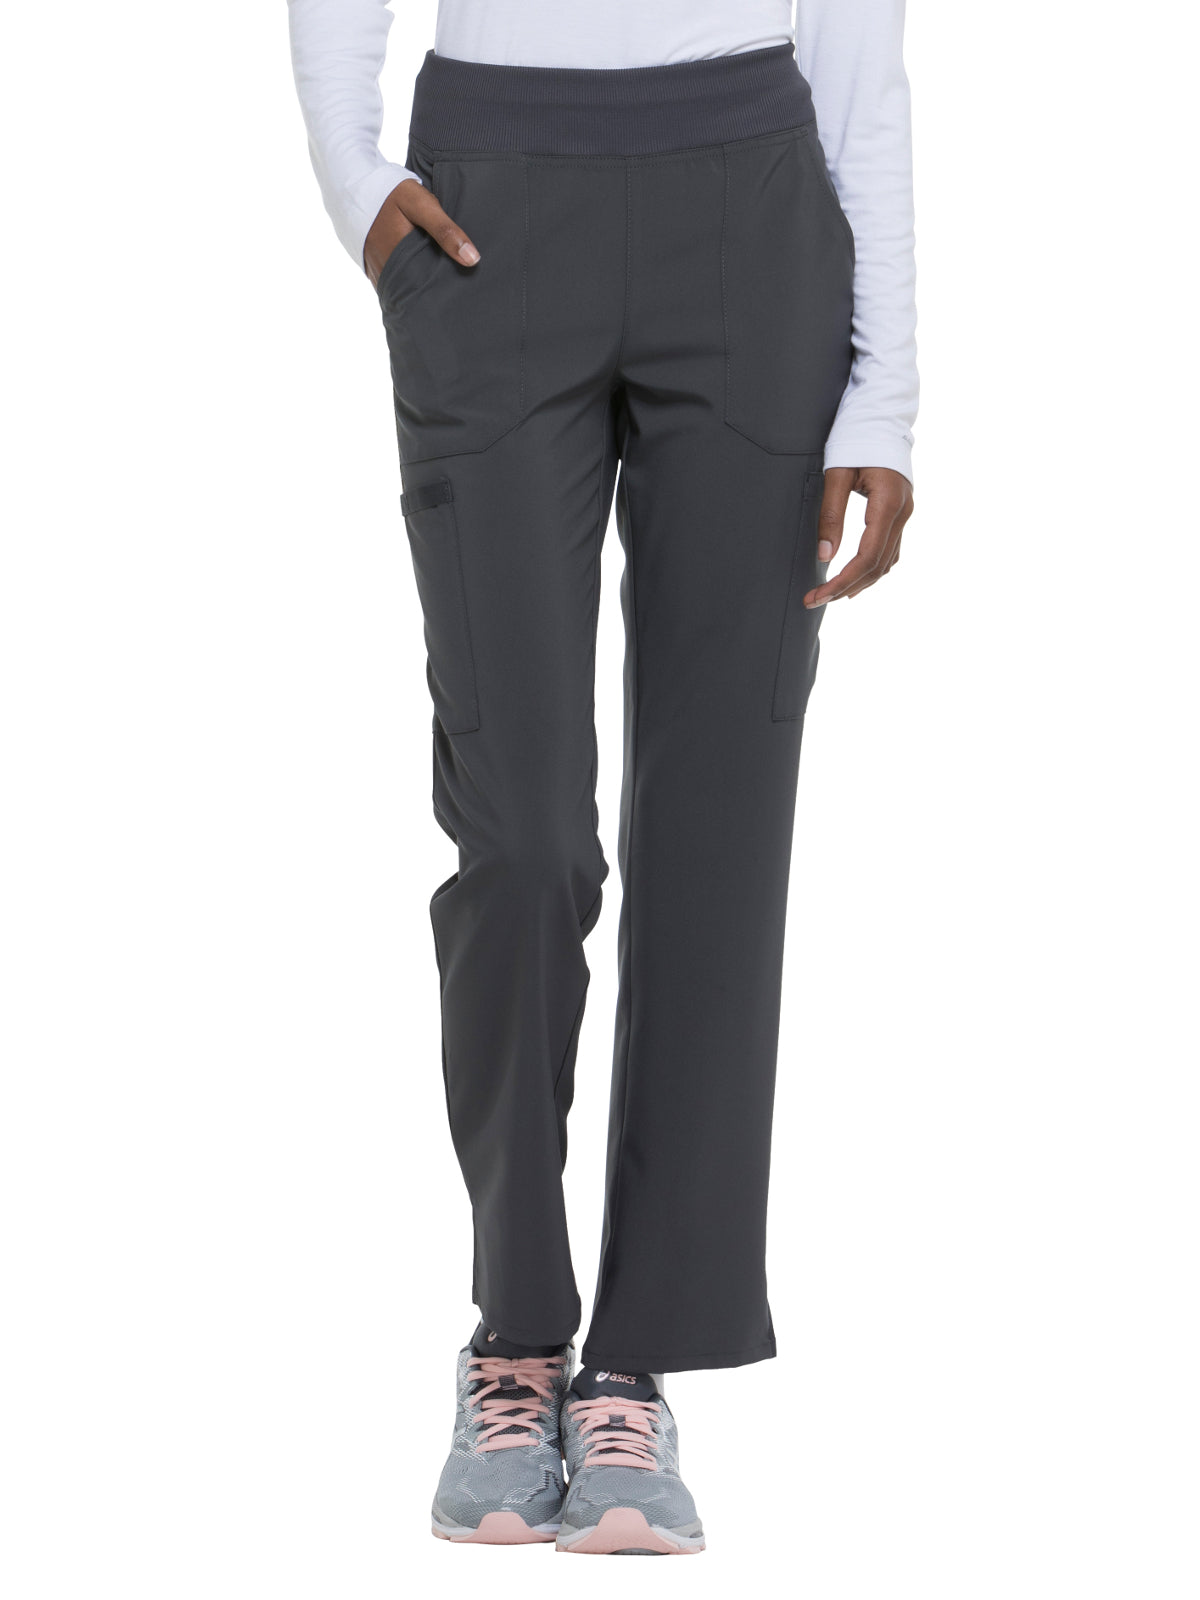 Women's Natural Rise Tapered Leg Pull-On Pant - DK005 - Pewter